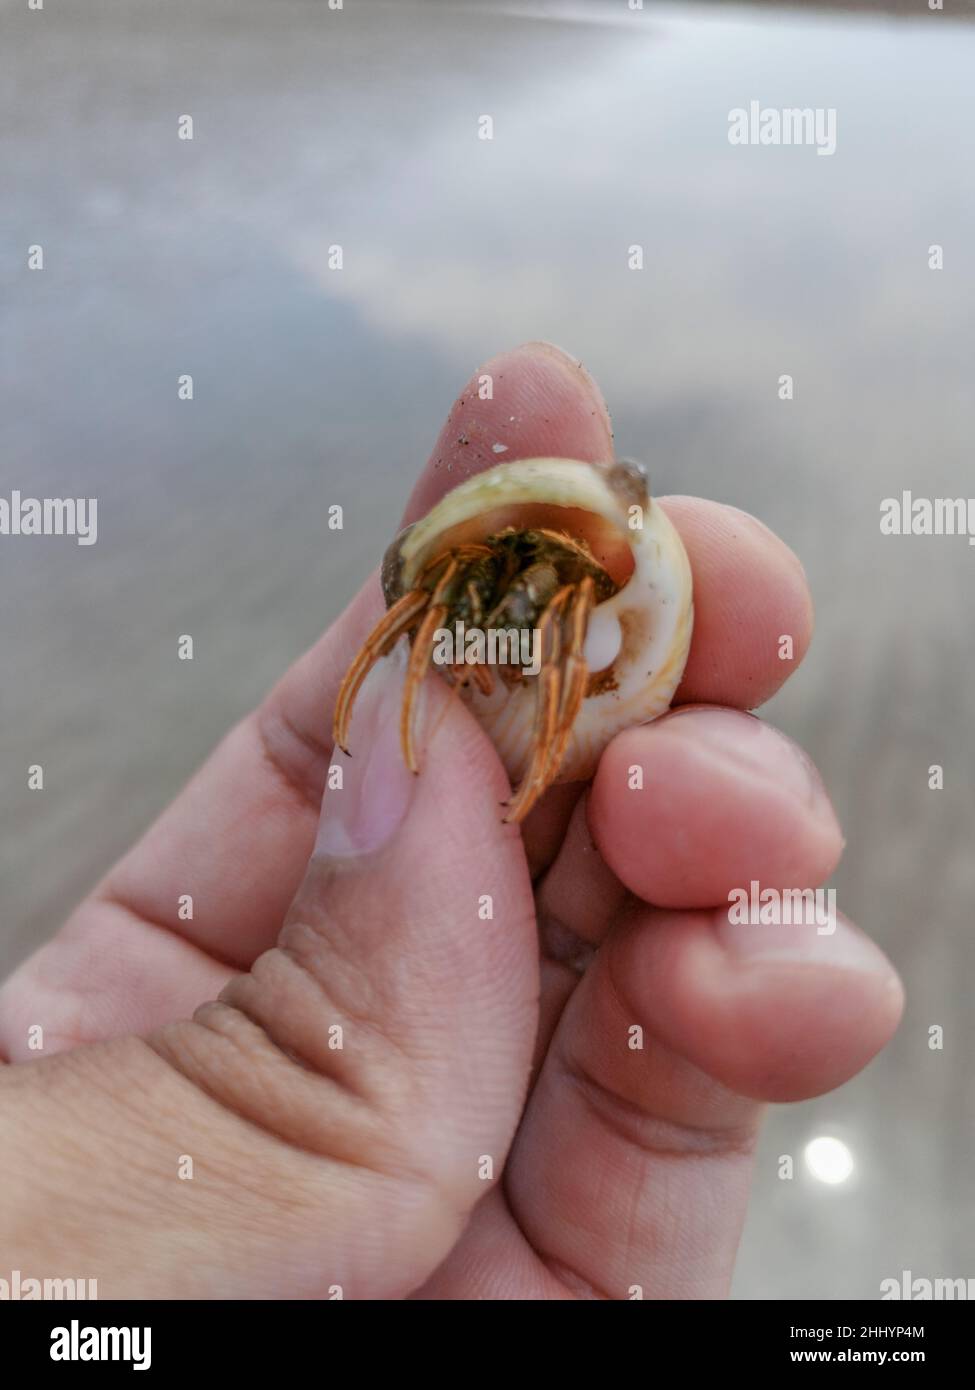 Hermit crab hides in the shell that is in the hand. Small hermit crab in the sink holding a male hand close up. Hand holding hermit crab Stock Photo